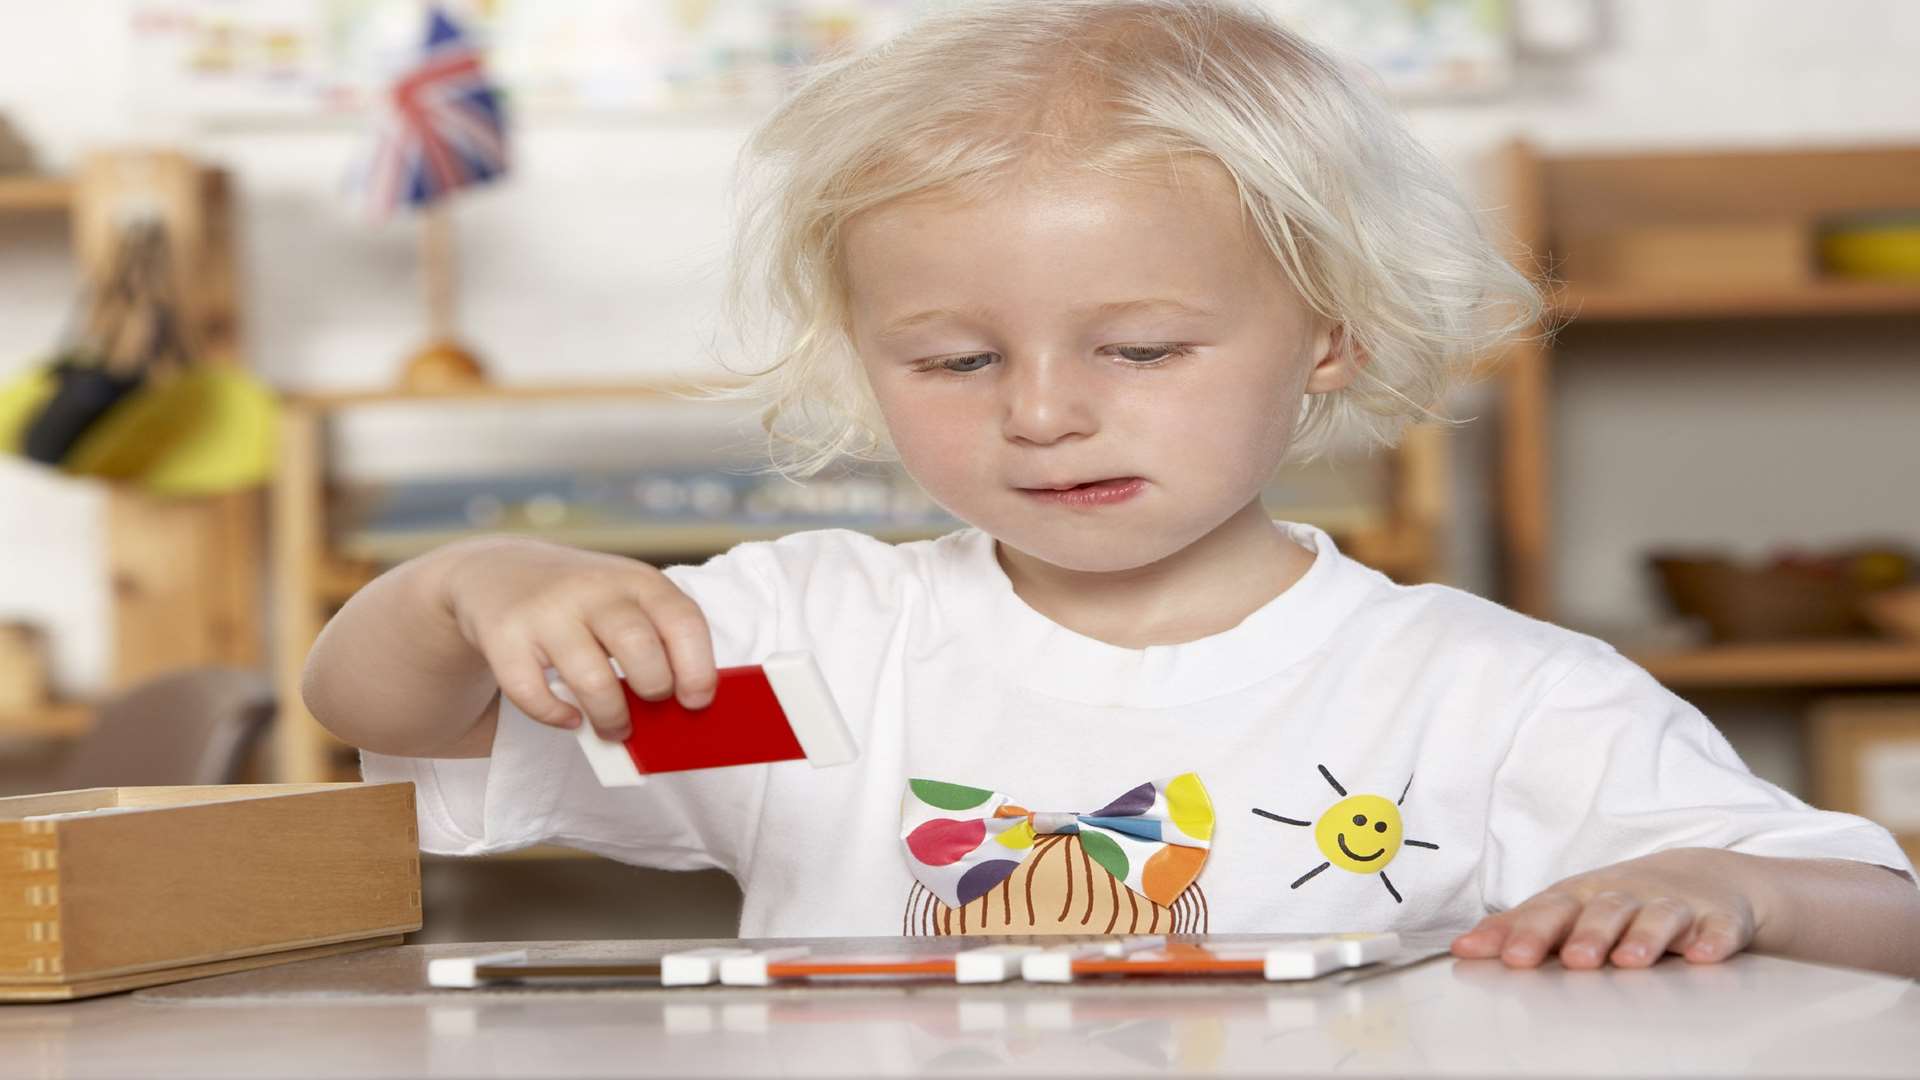 Nurseries are resorting to coffee mornings to stay afloat. Picture: Istock/monkeybusinessimages